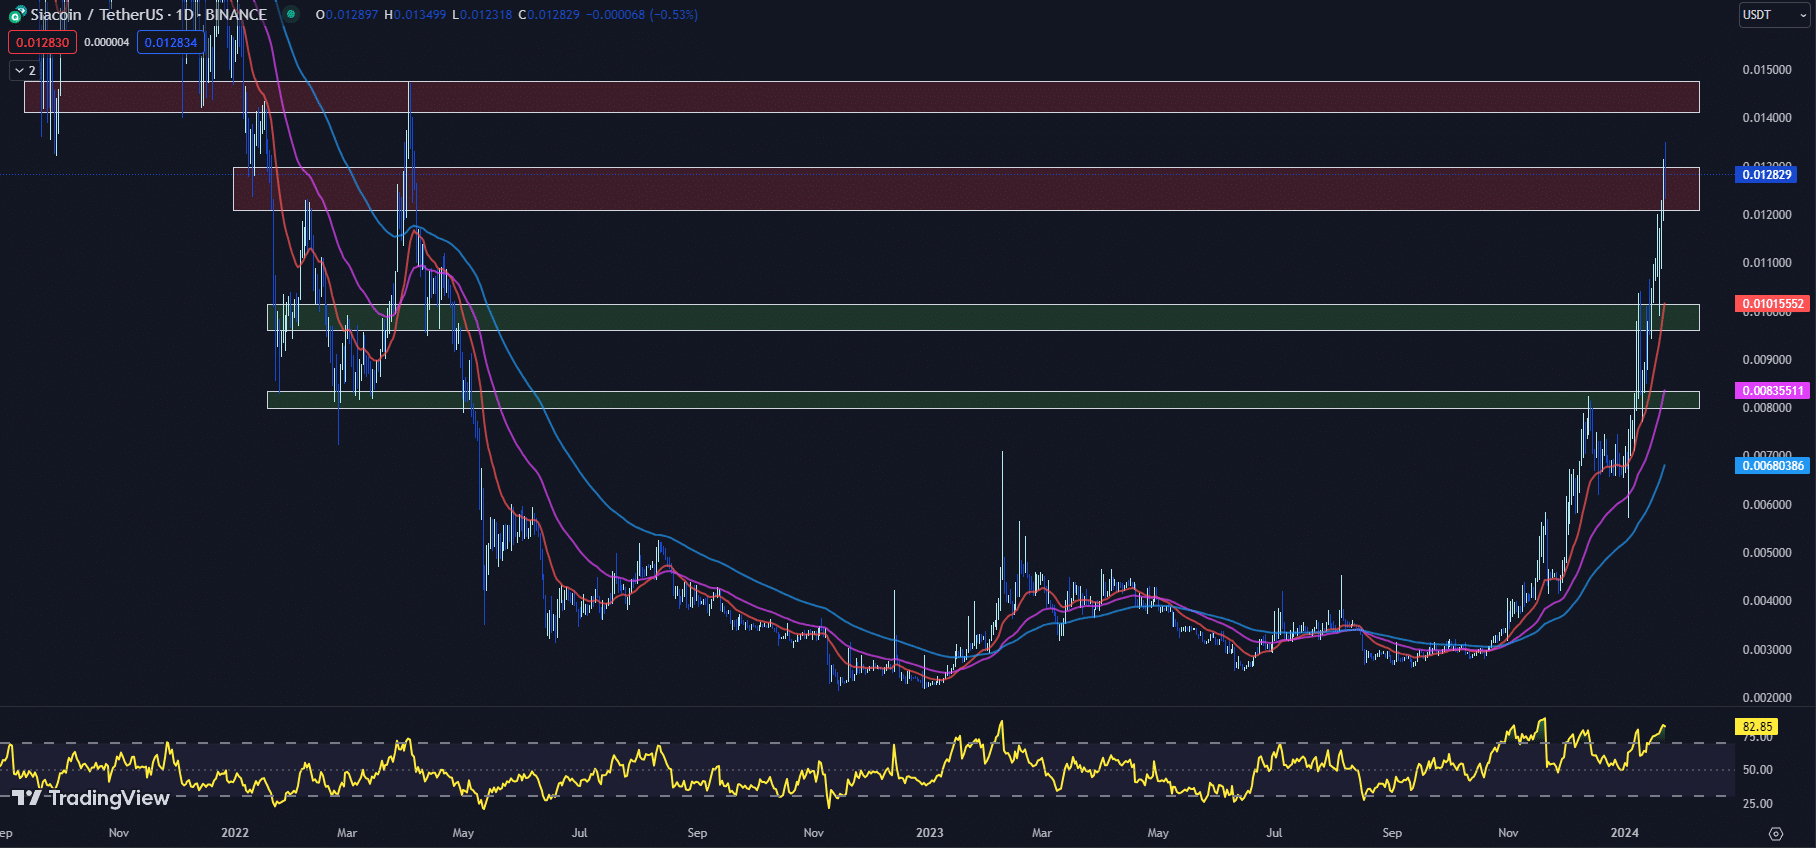 Siacoin SC price chart in tradingview